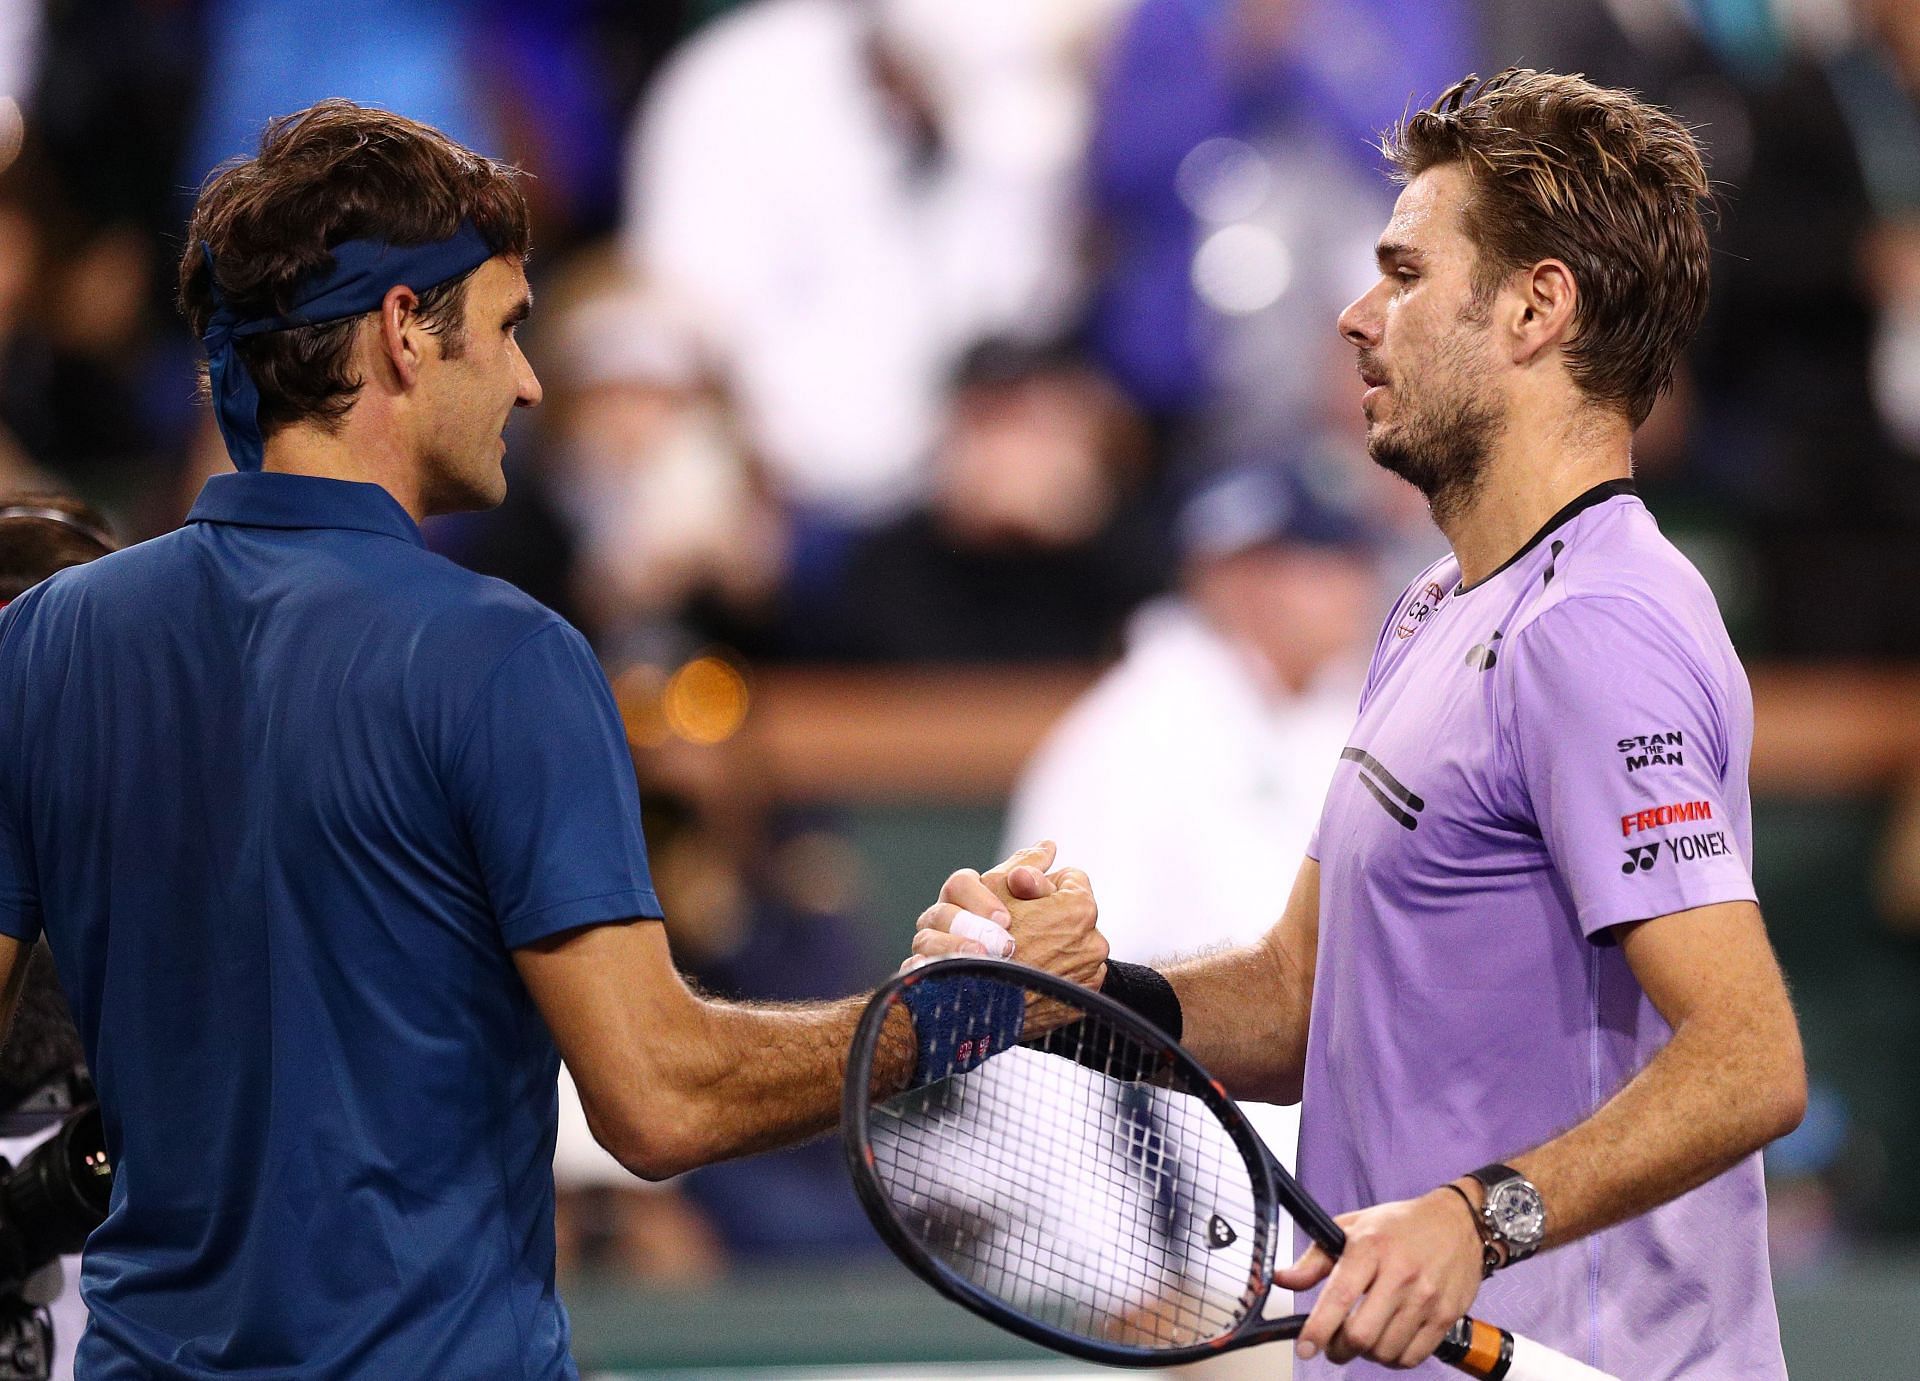 Roger Federer and Stan Wawrinka at the Indian Wells Masters 2021